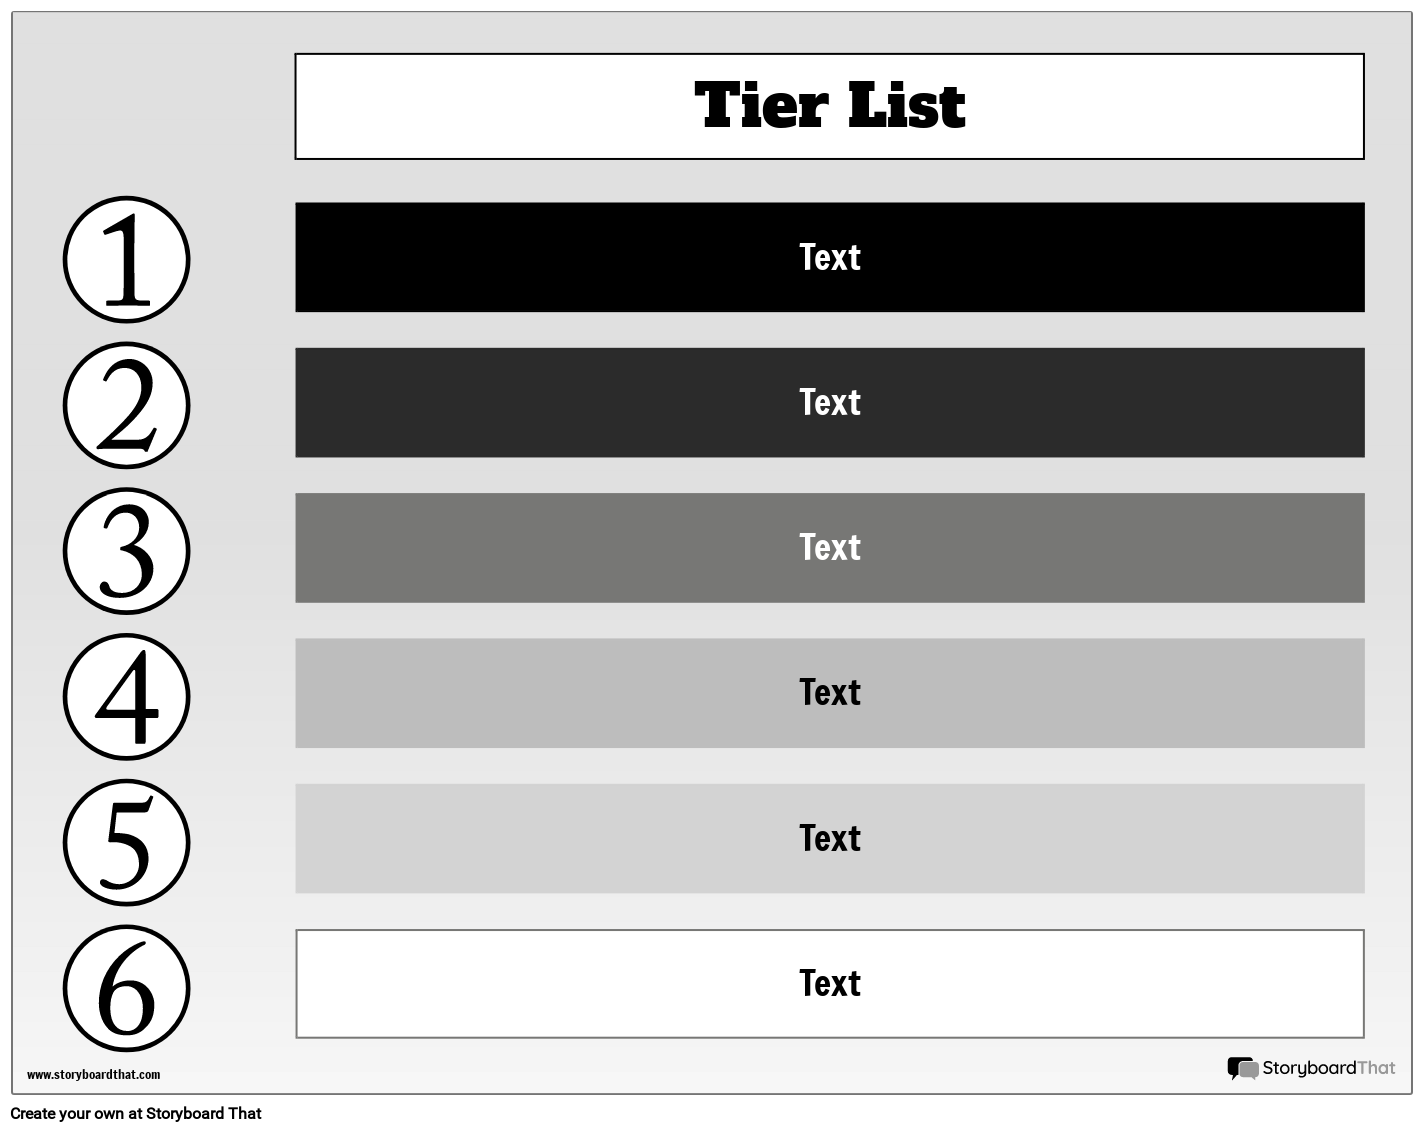 Free Tier List Maker: Make a tier list for anything